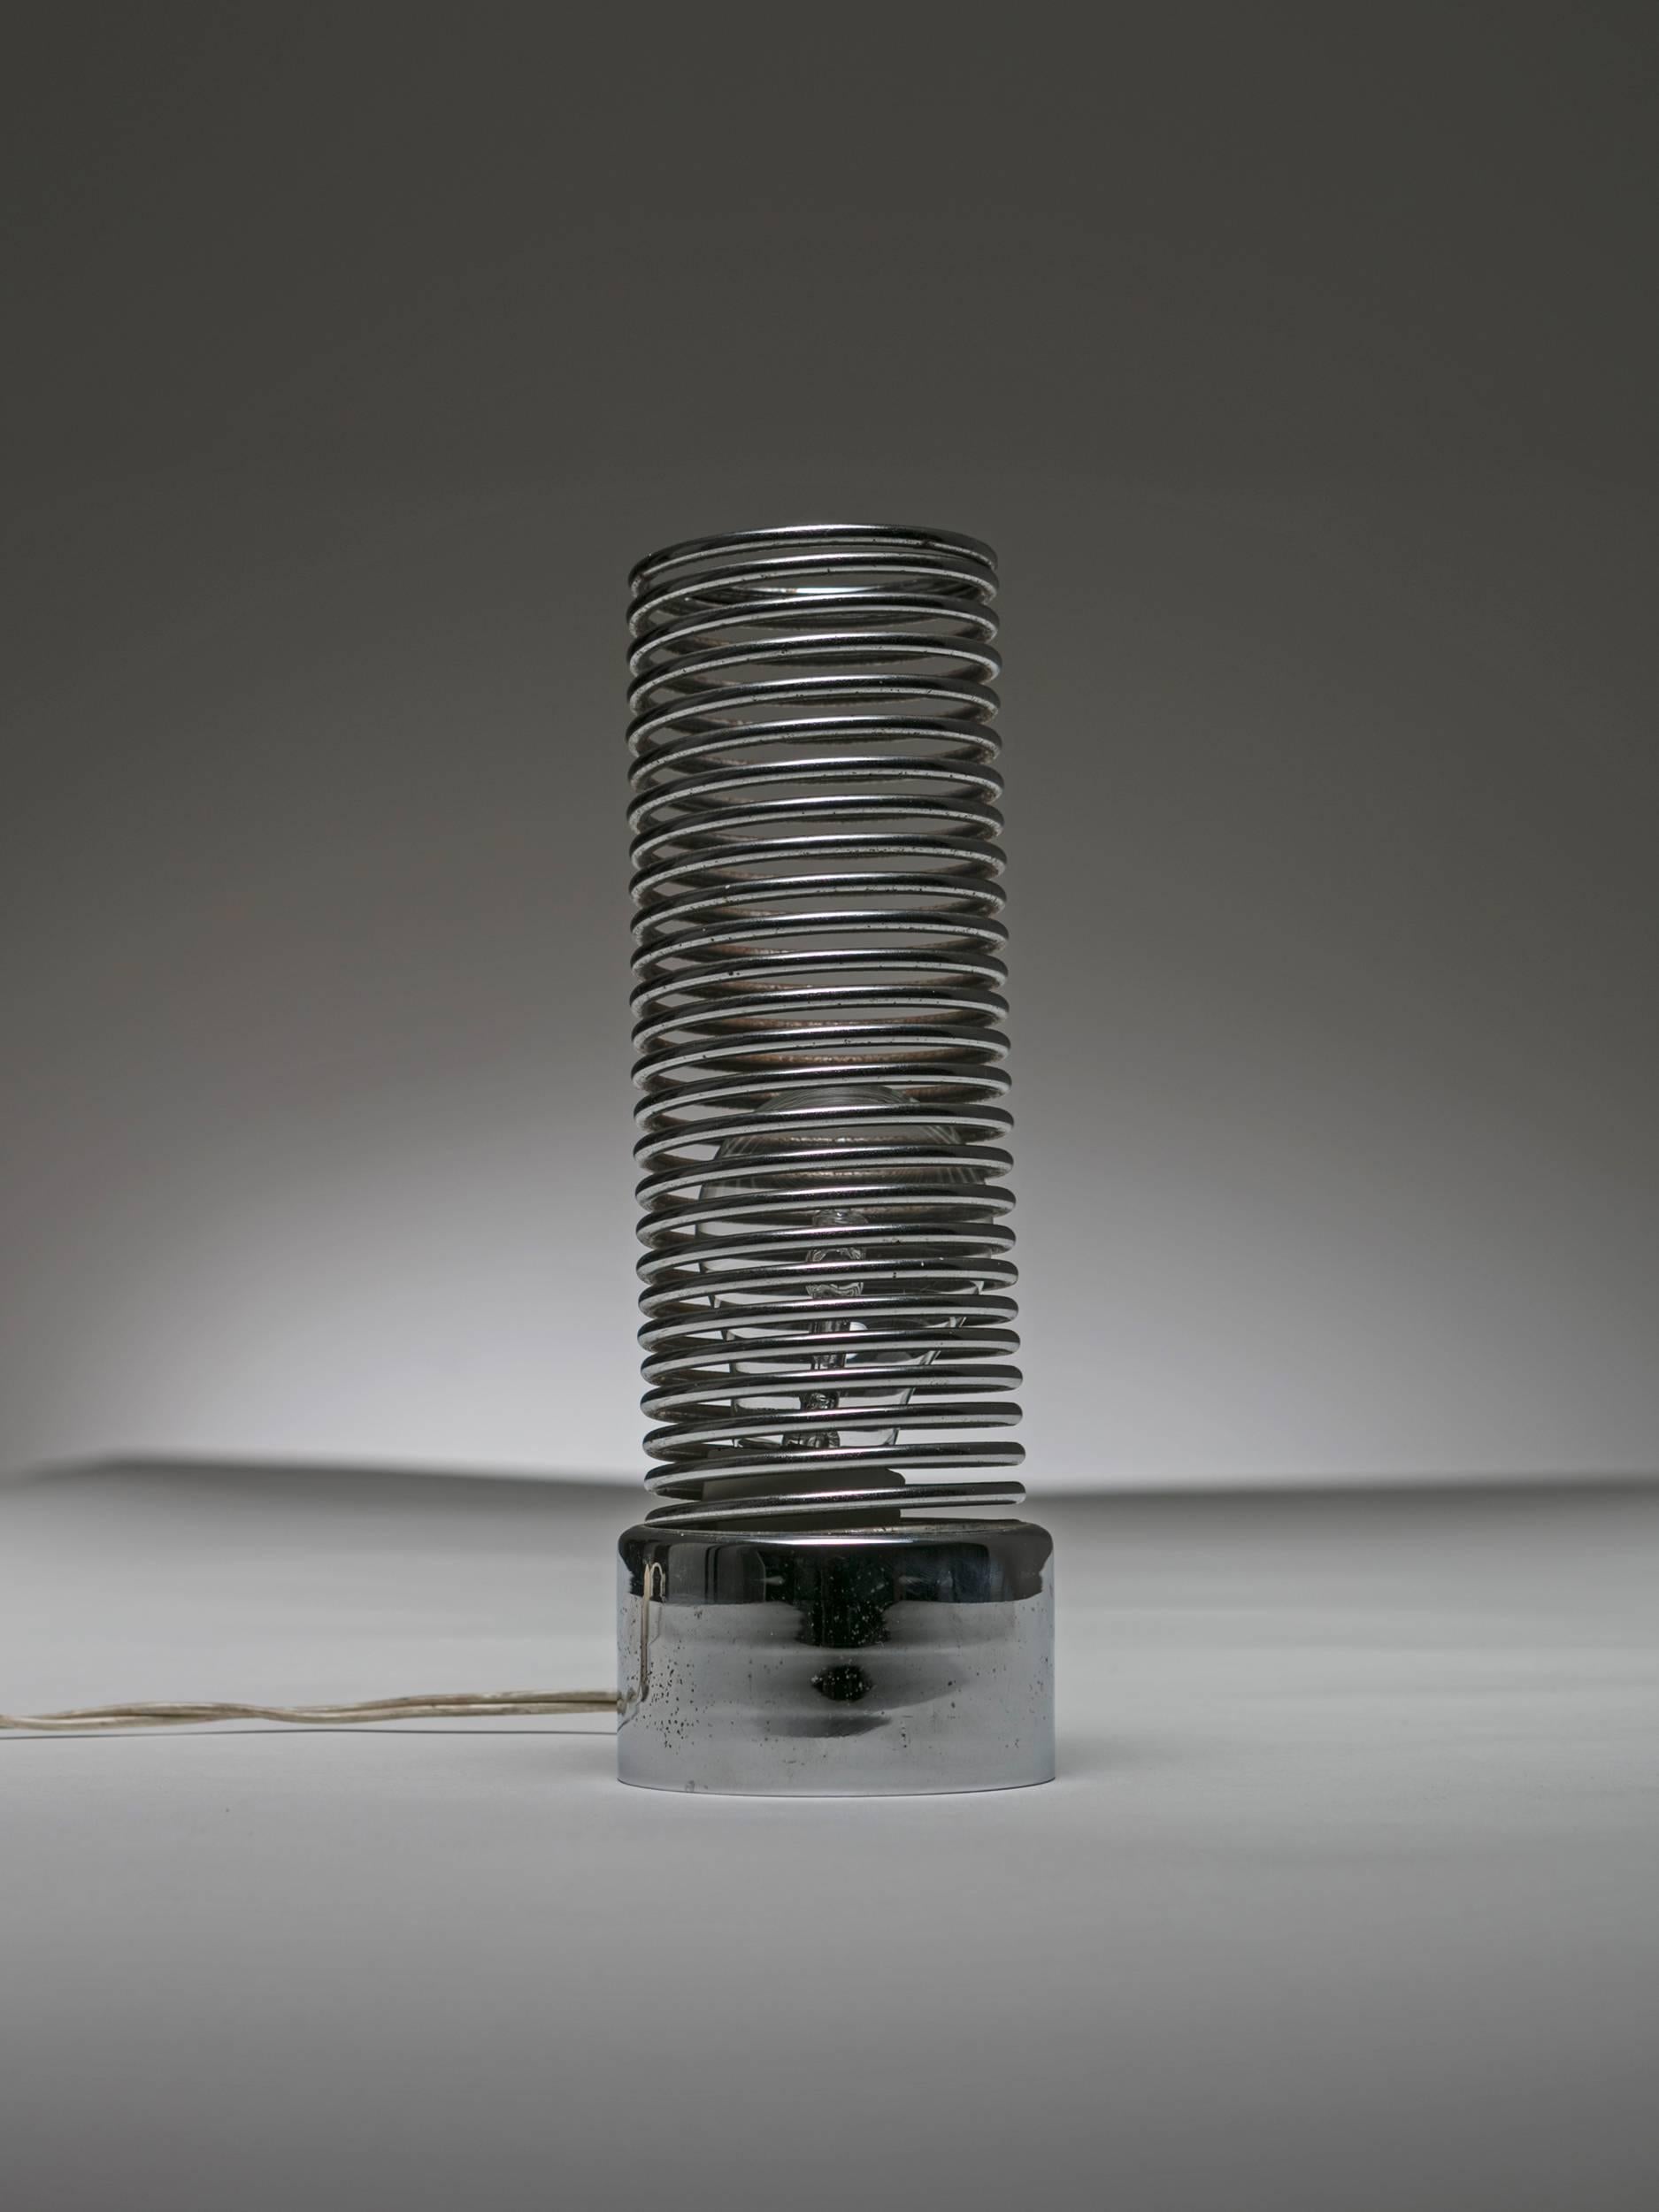 Spring table Lamp by Harvey Guzzini.
Heavy metal base hosts the light bulb which light is softly diffused along the metal spring.